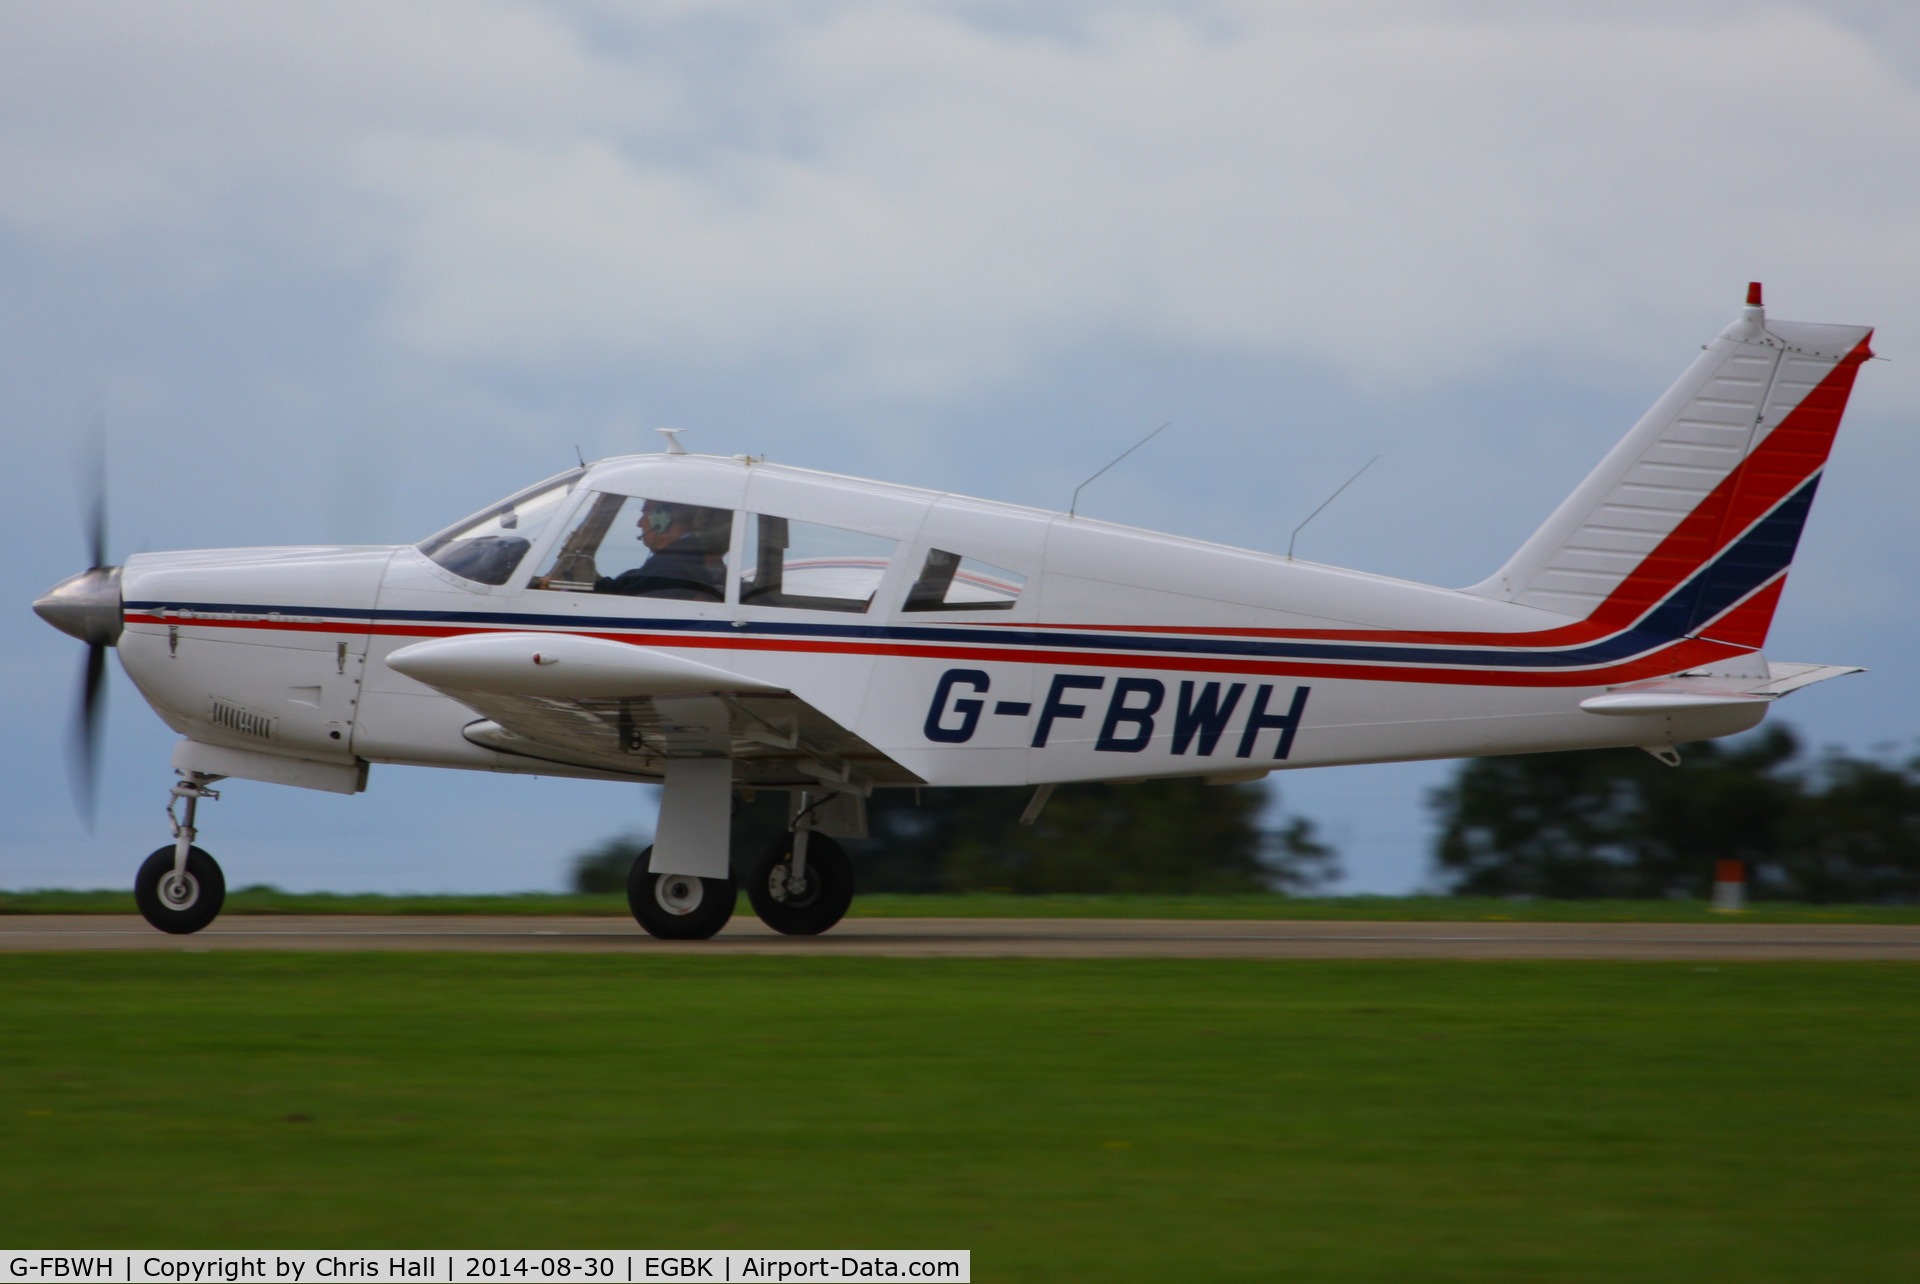 G-FBWH, 1968 Piper PA-28R-180 Cherokee Arrow C/N 28R-30368, at the LAA Rally 2014, Sywell